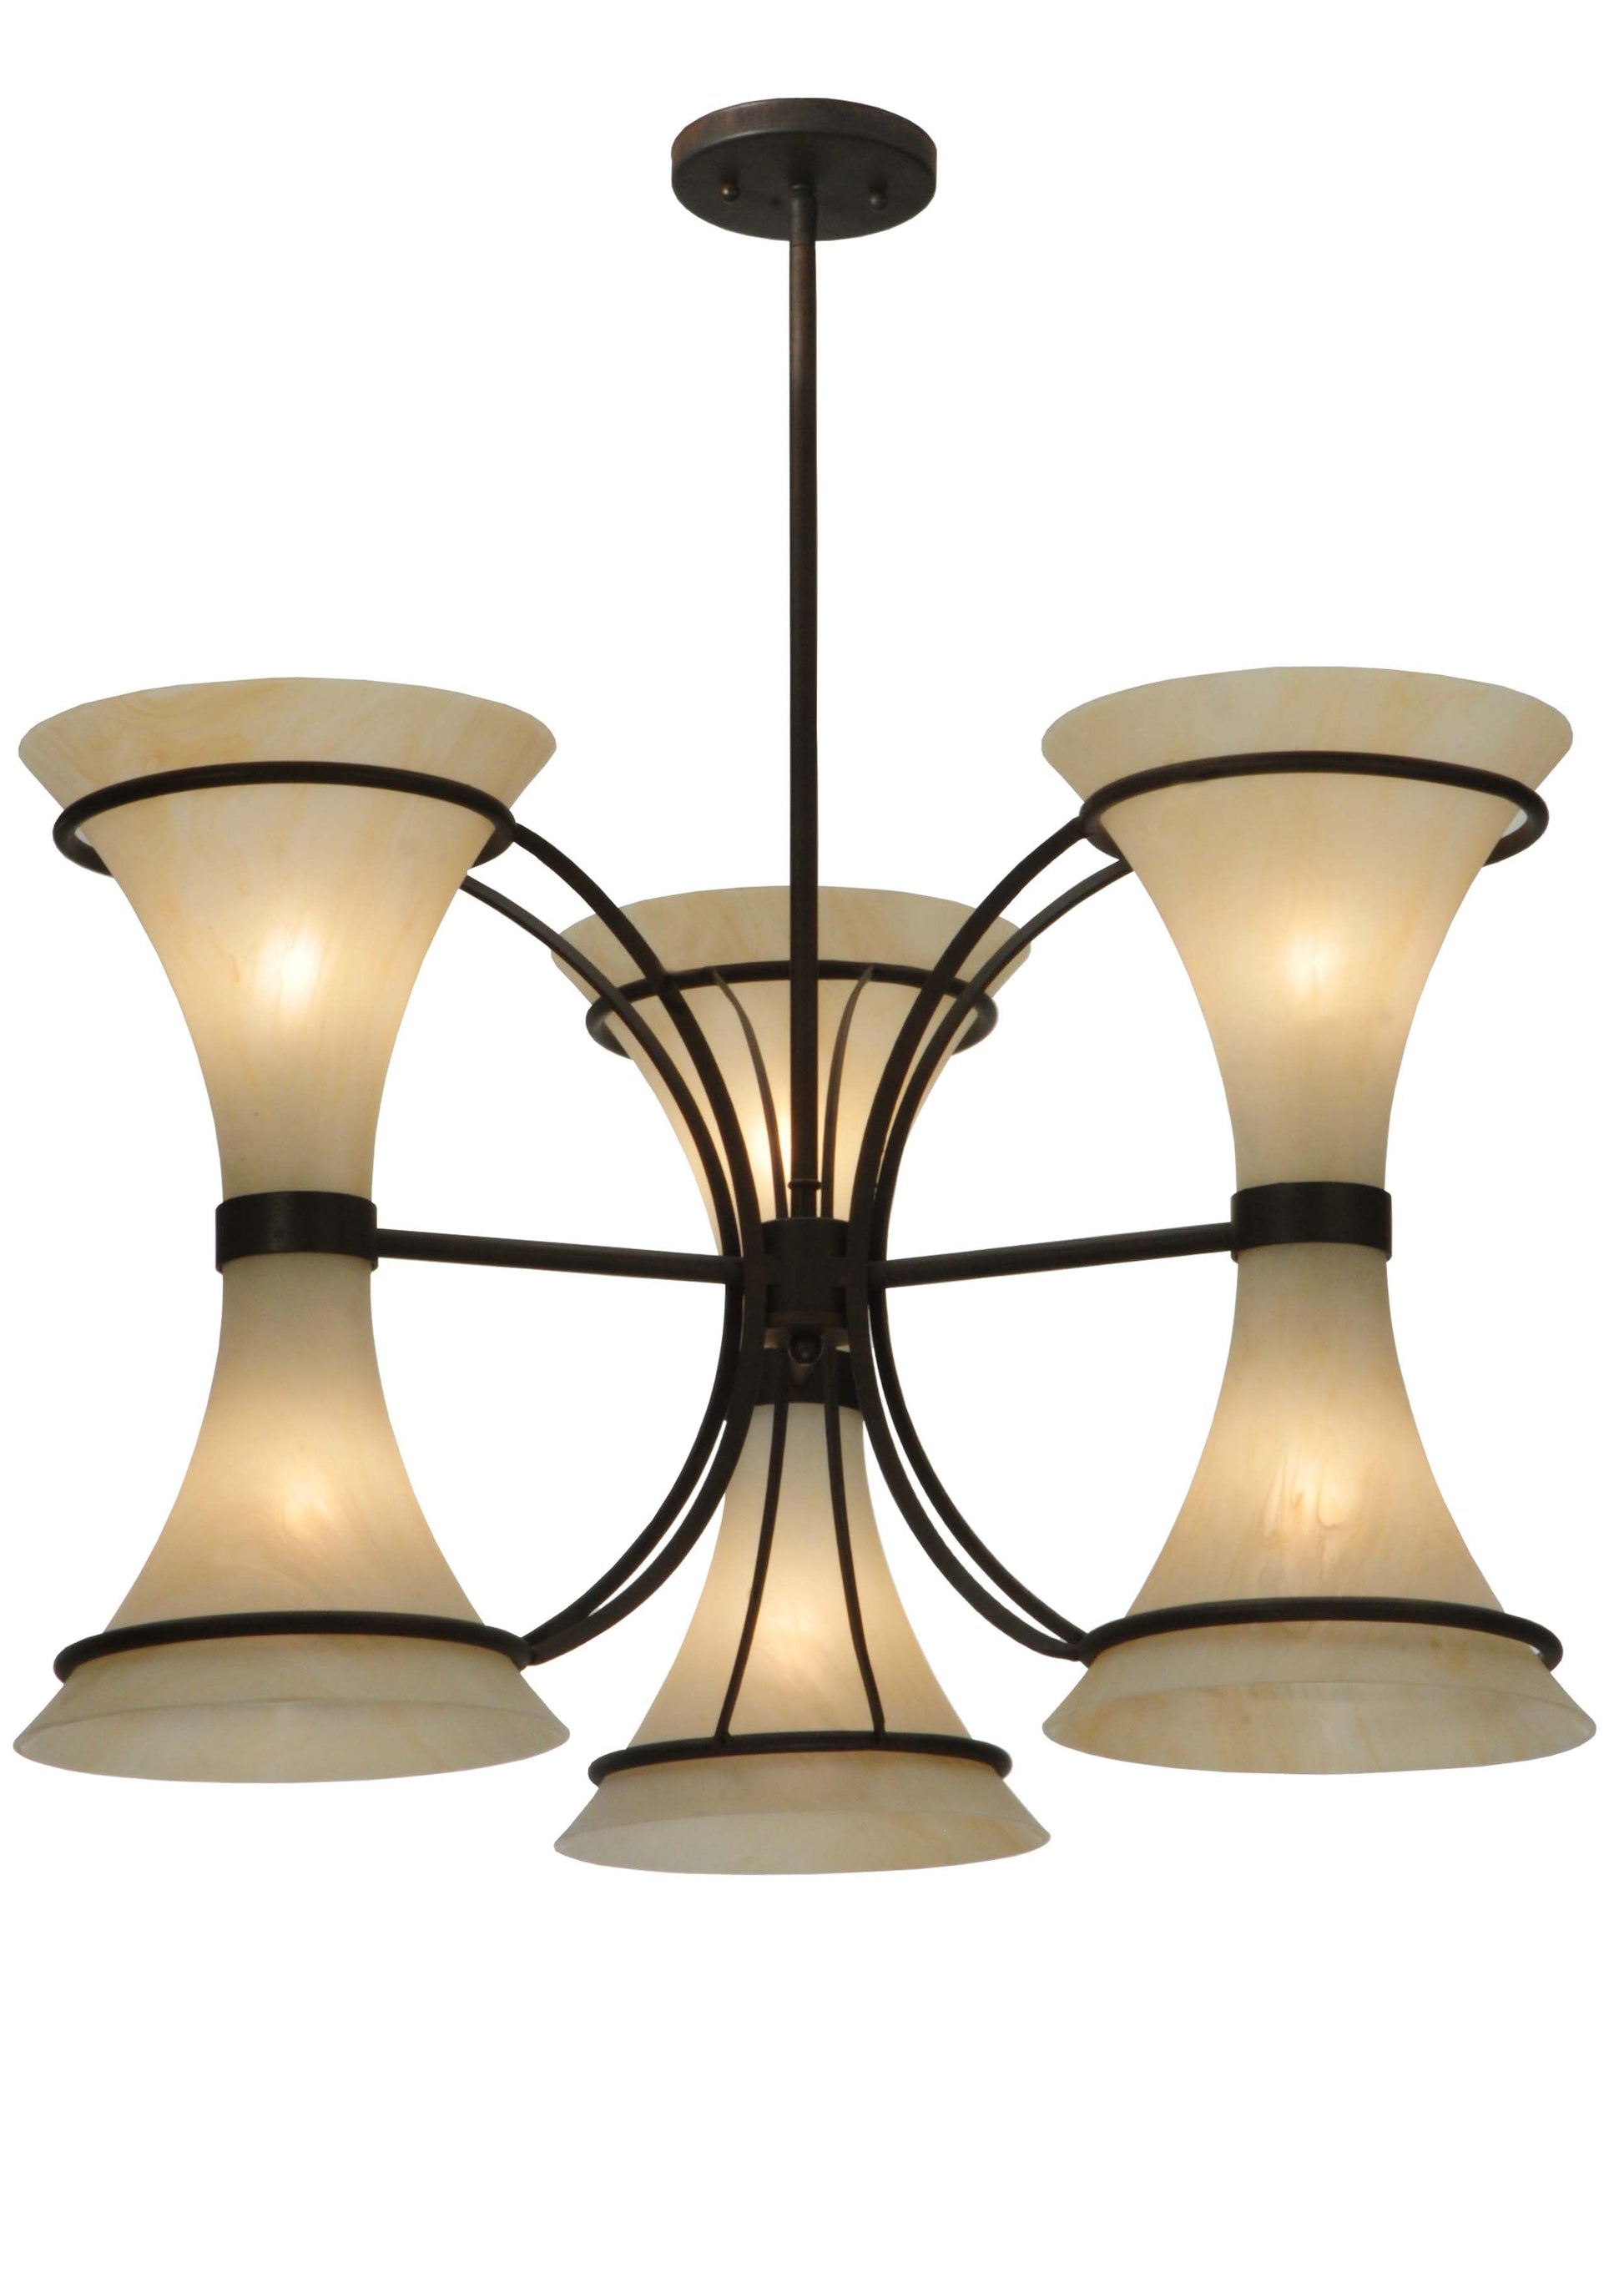 30" Chronos 3 Arm Chandelier by 2nd Ave Lighting